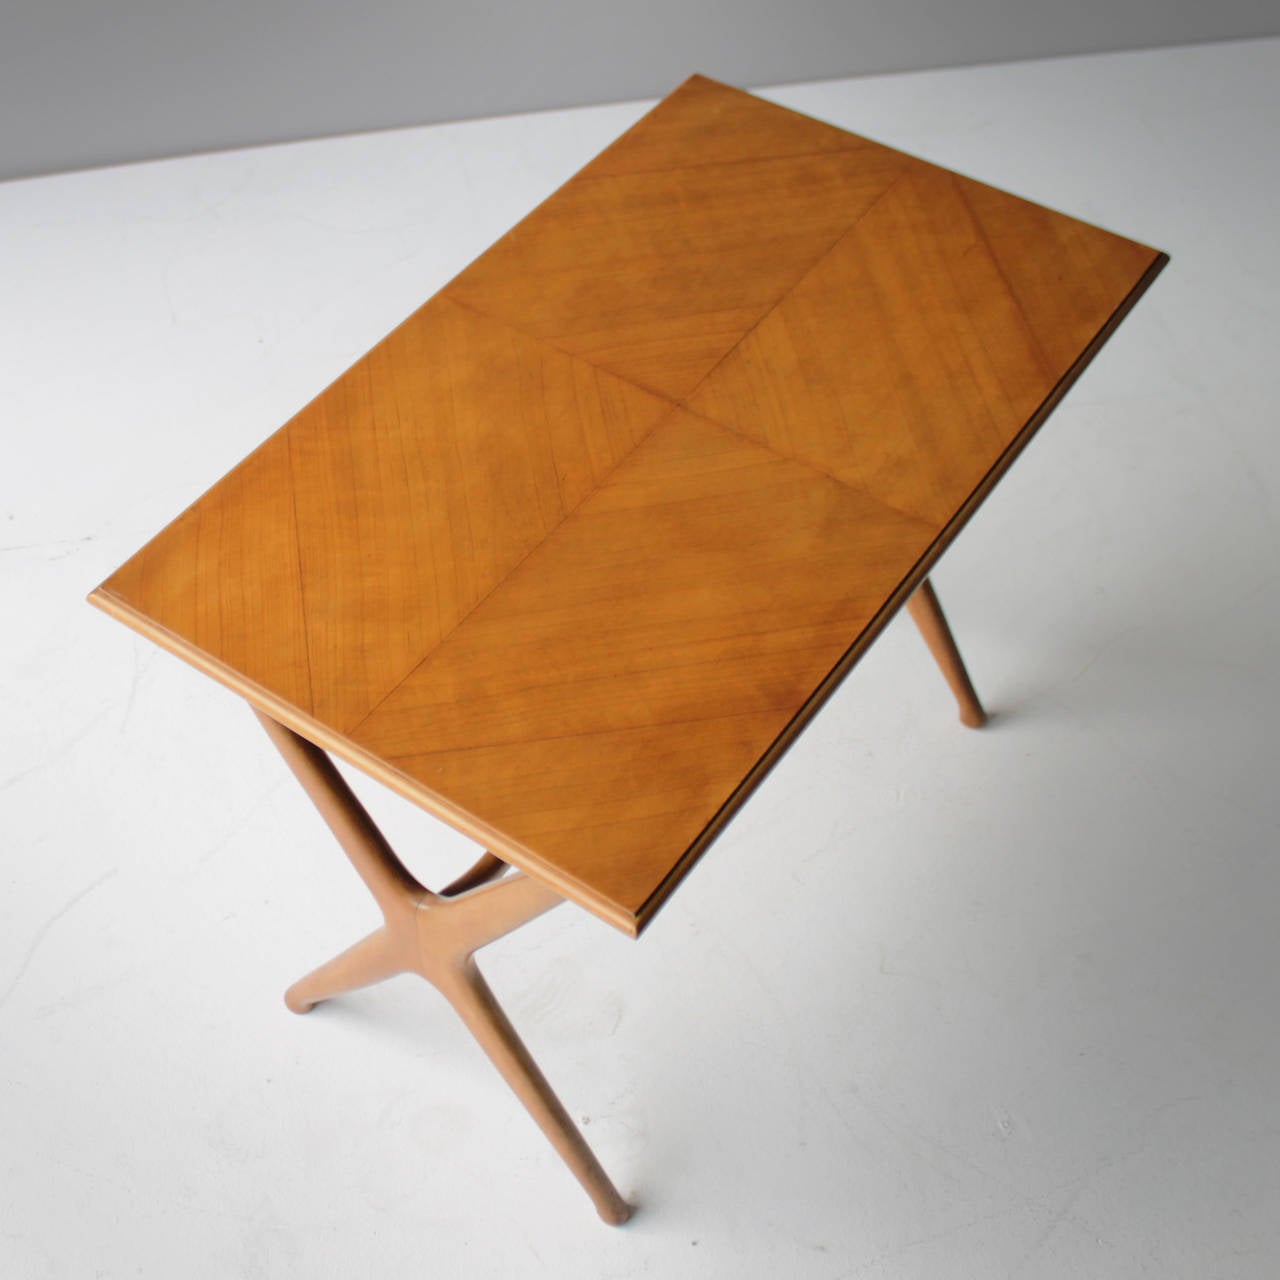 Mid-Century Modern Side Table Attributed to Gio Ponti for Domus Nova